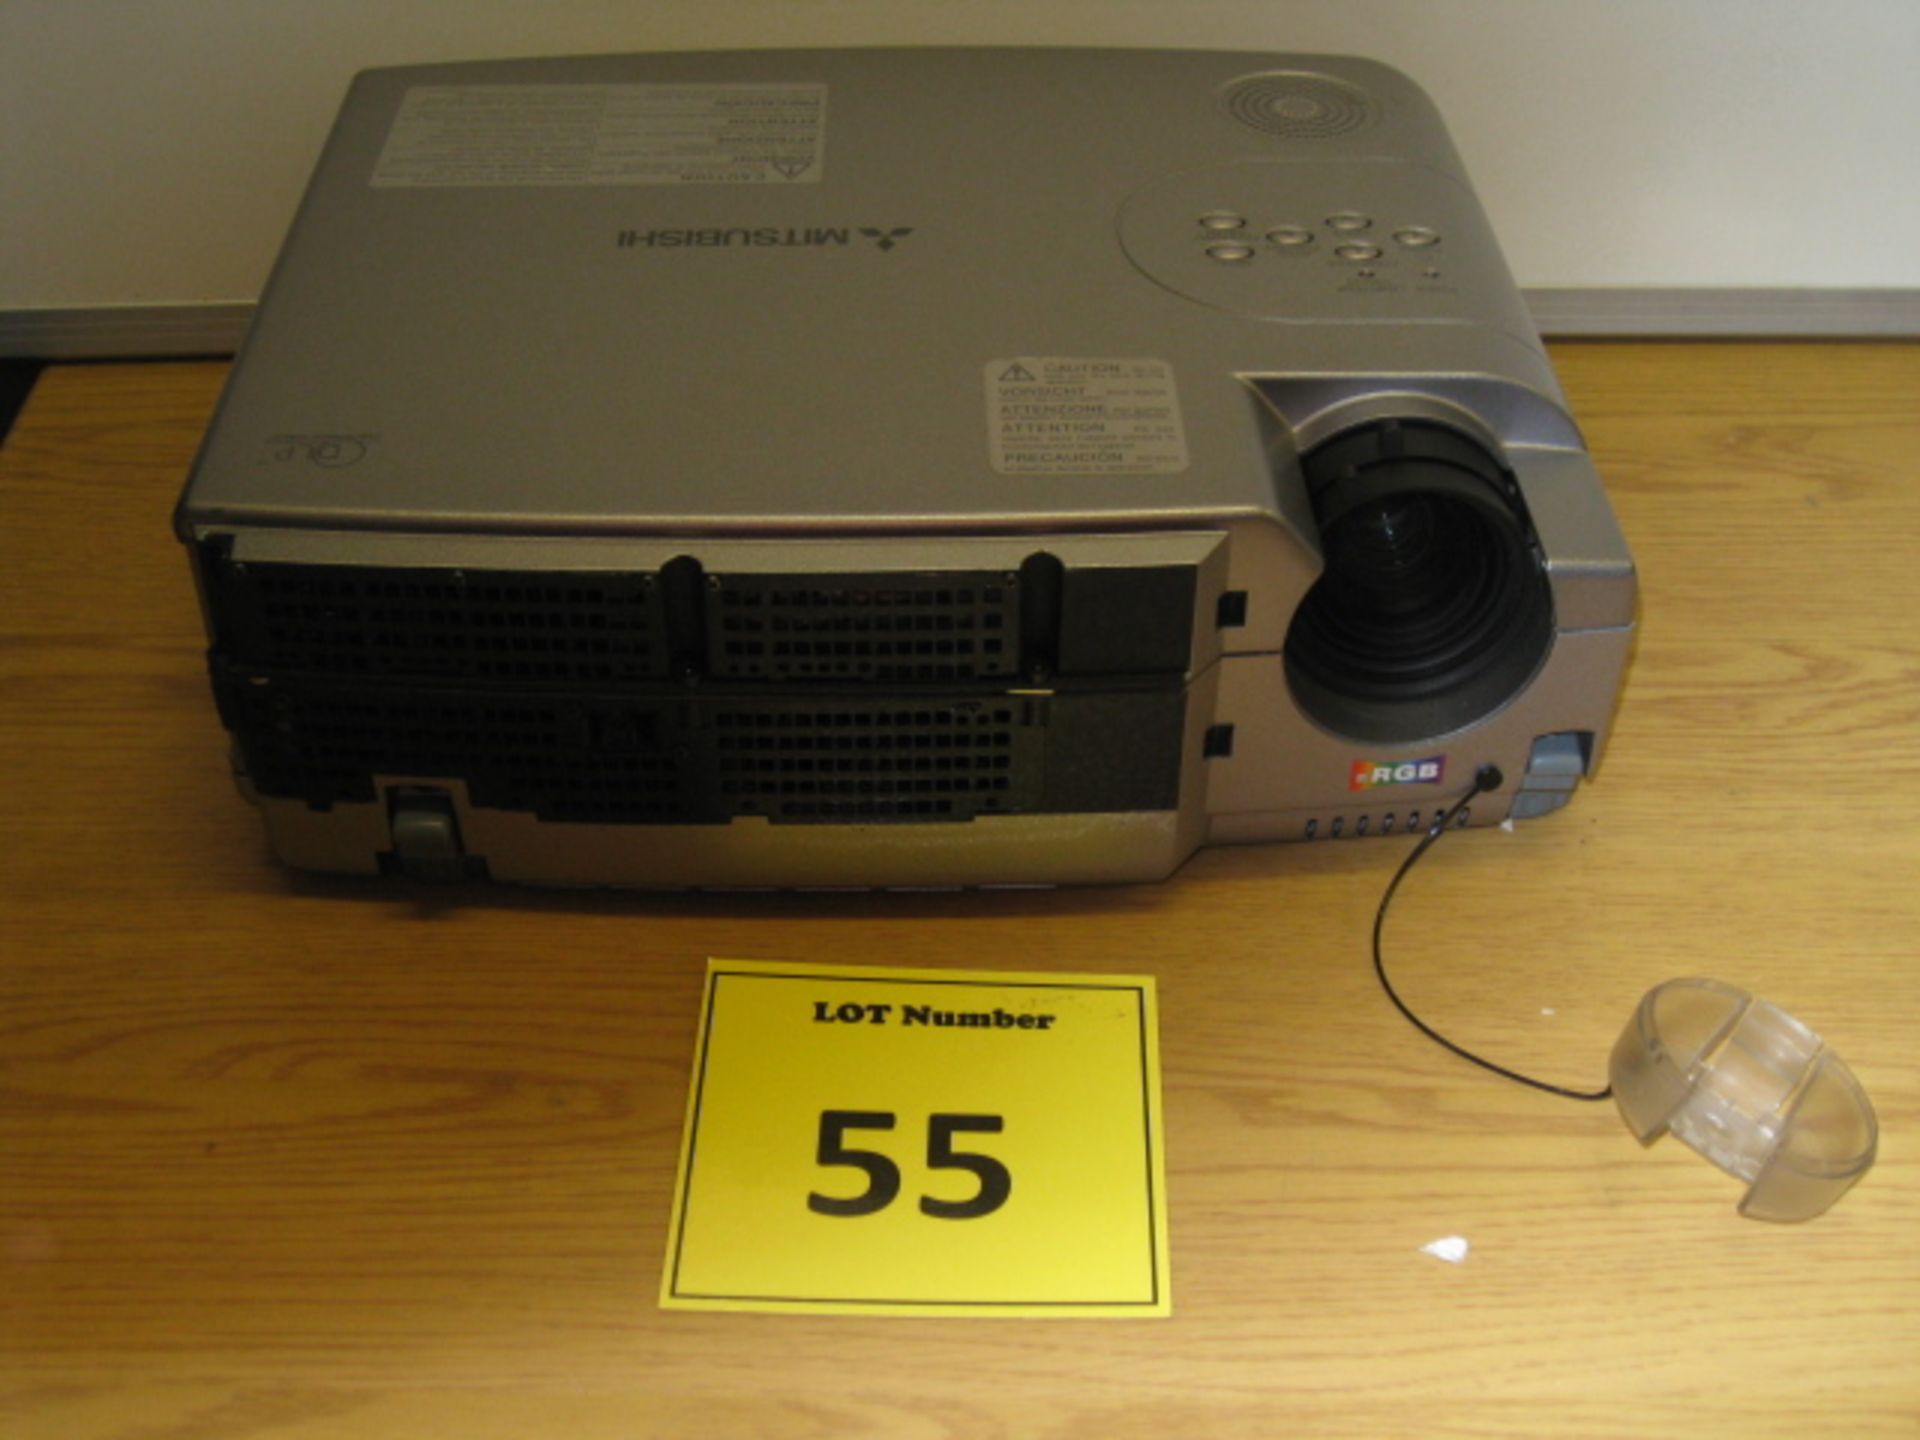 MITSUBISHI XD300U PROJECTOR WITH INSTRUCTION MANUAL AND BRIGHT PROJECTION IMAGE. IN CARRY CASE - Image 3 of 5